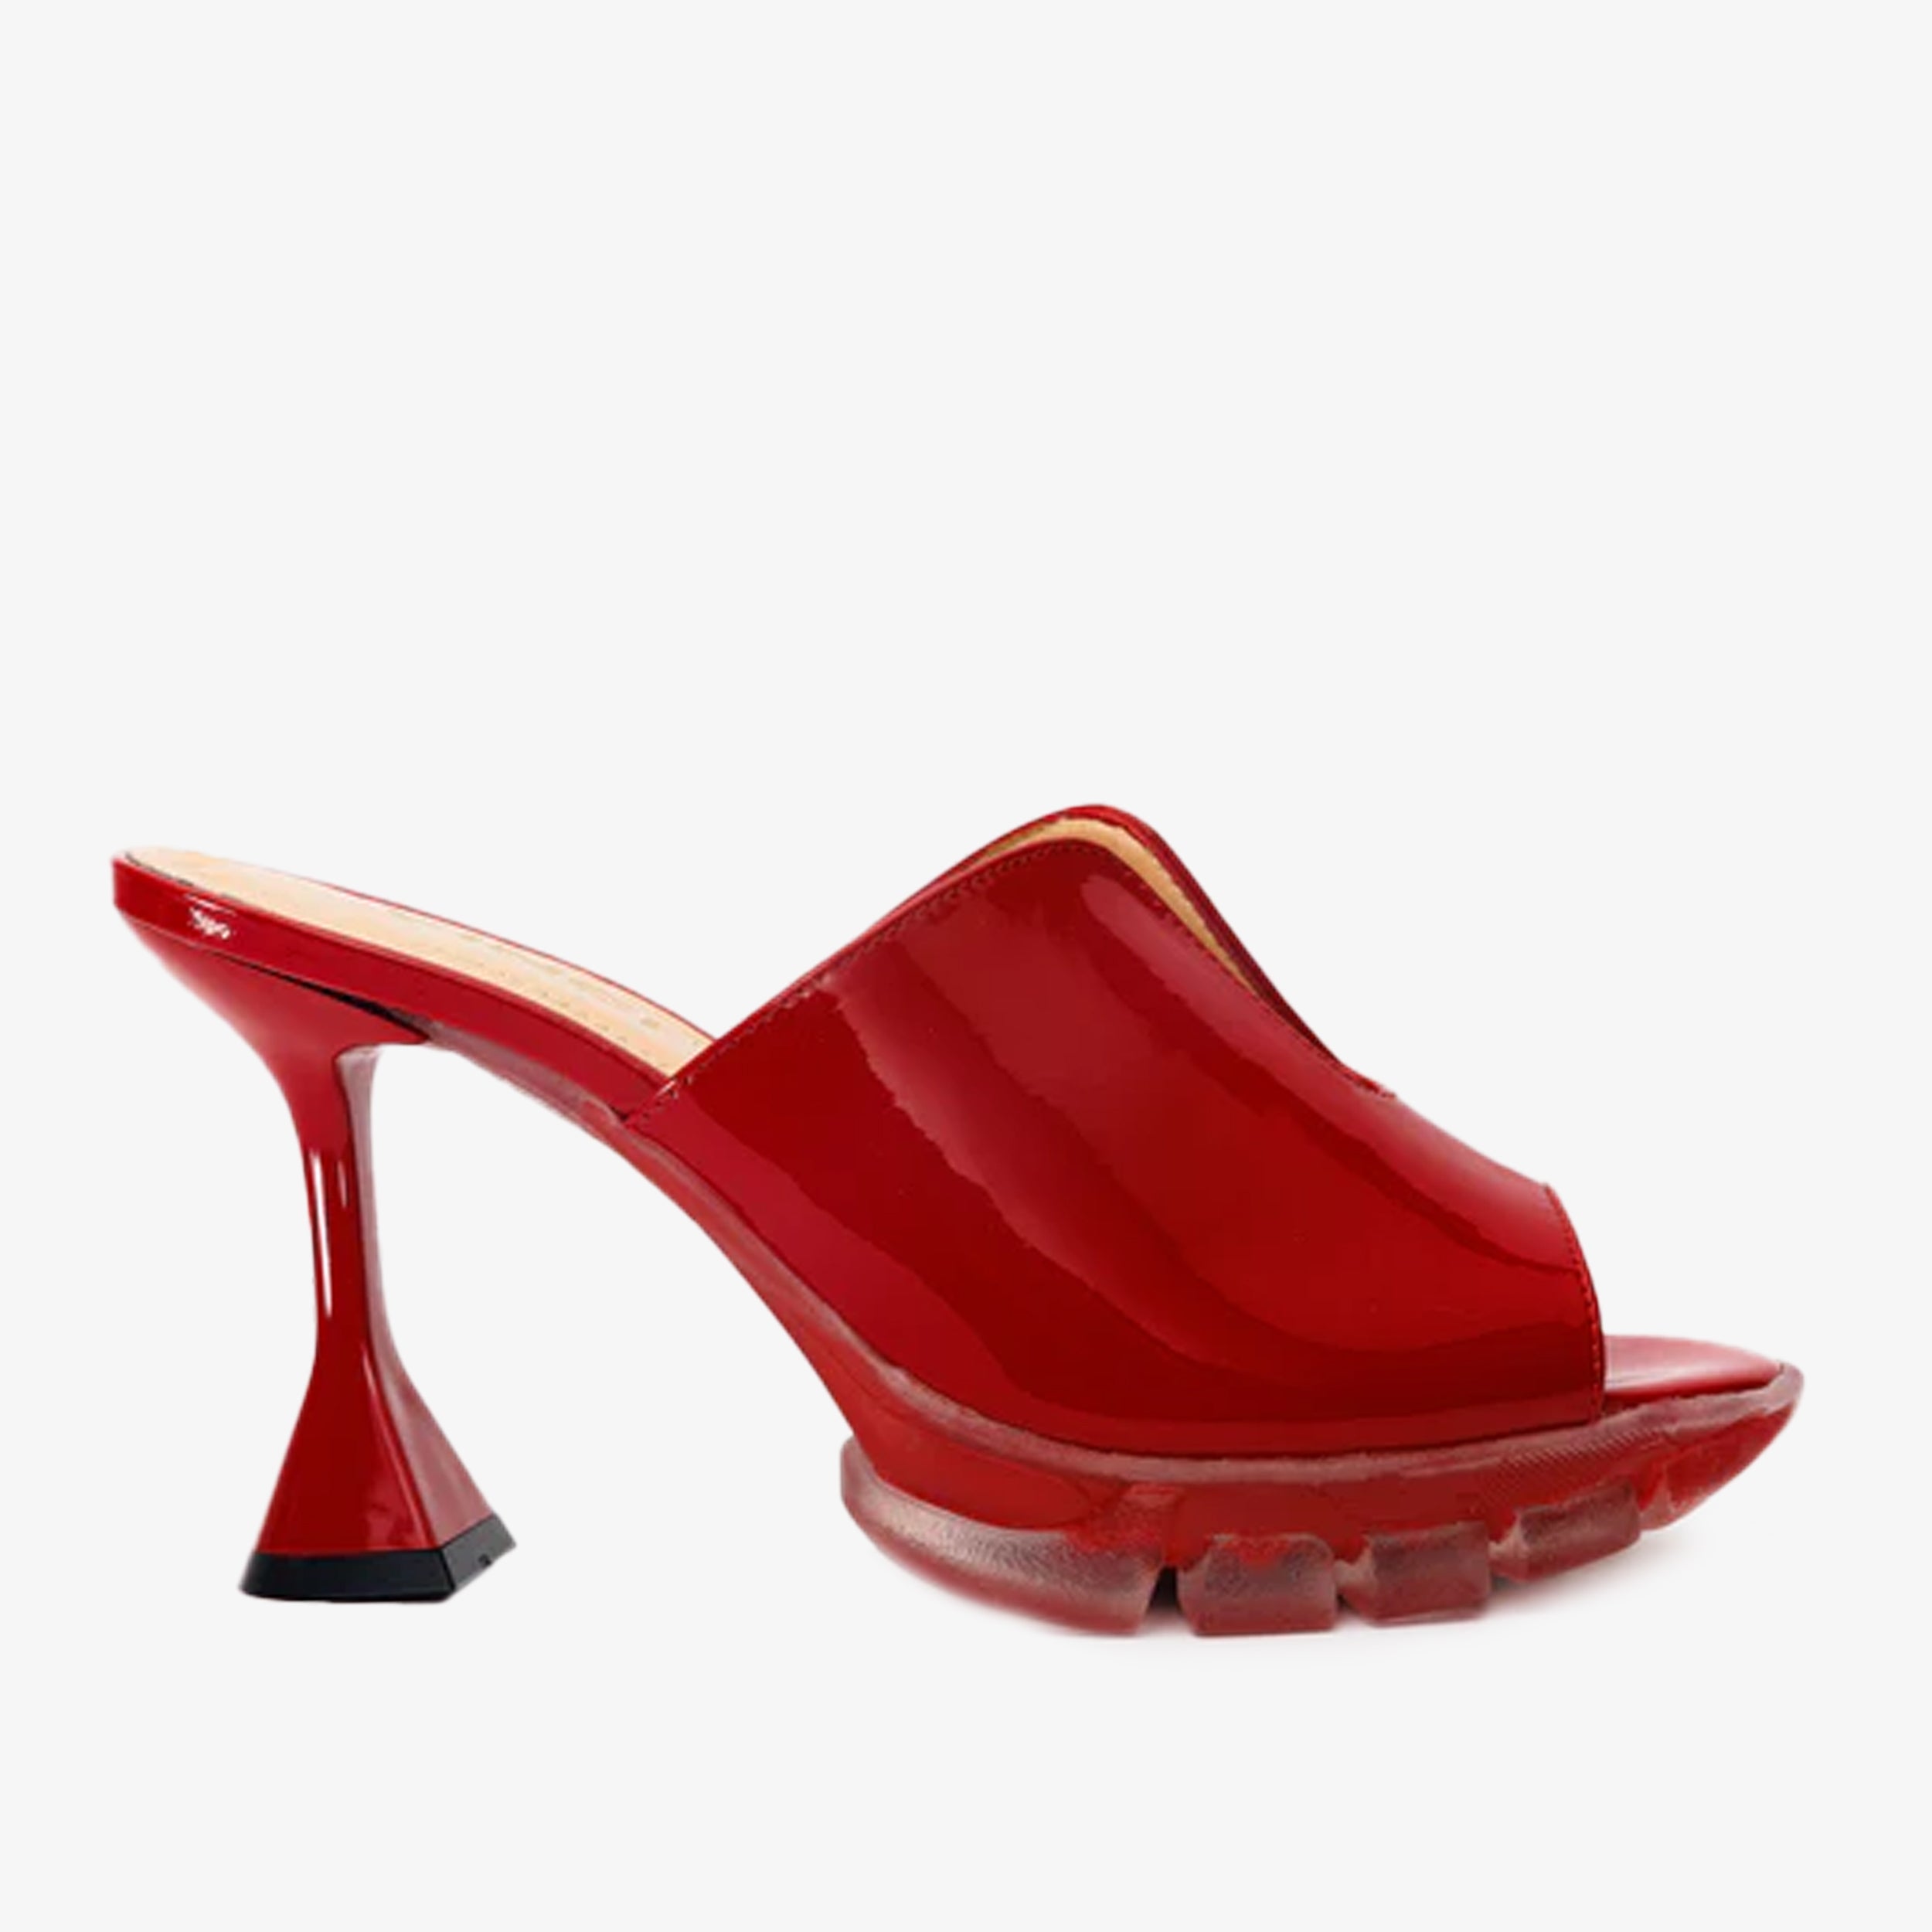 The Caratal Red Patent Leather Sandal